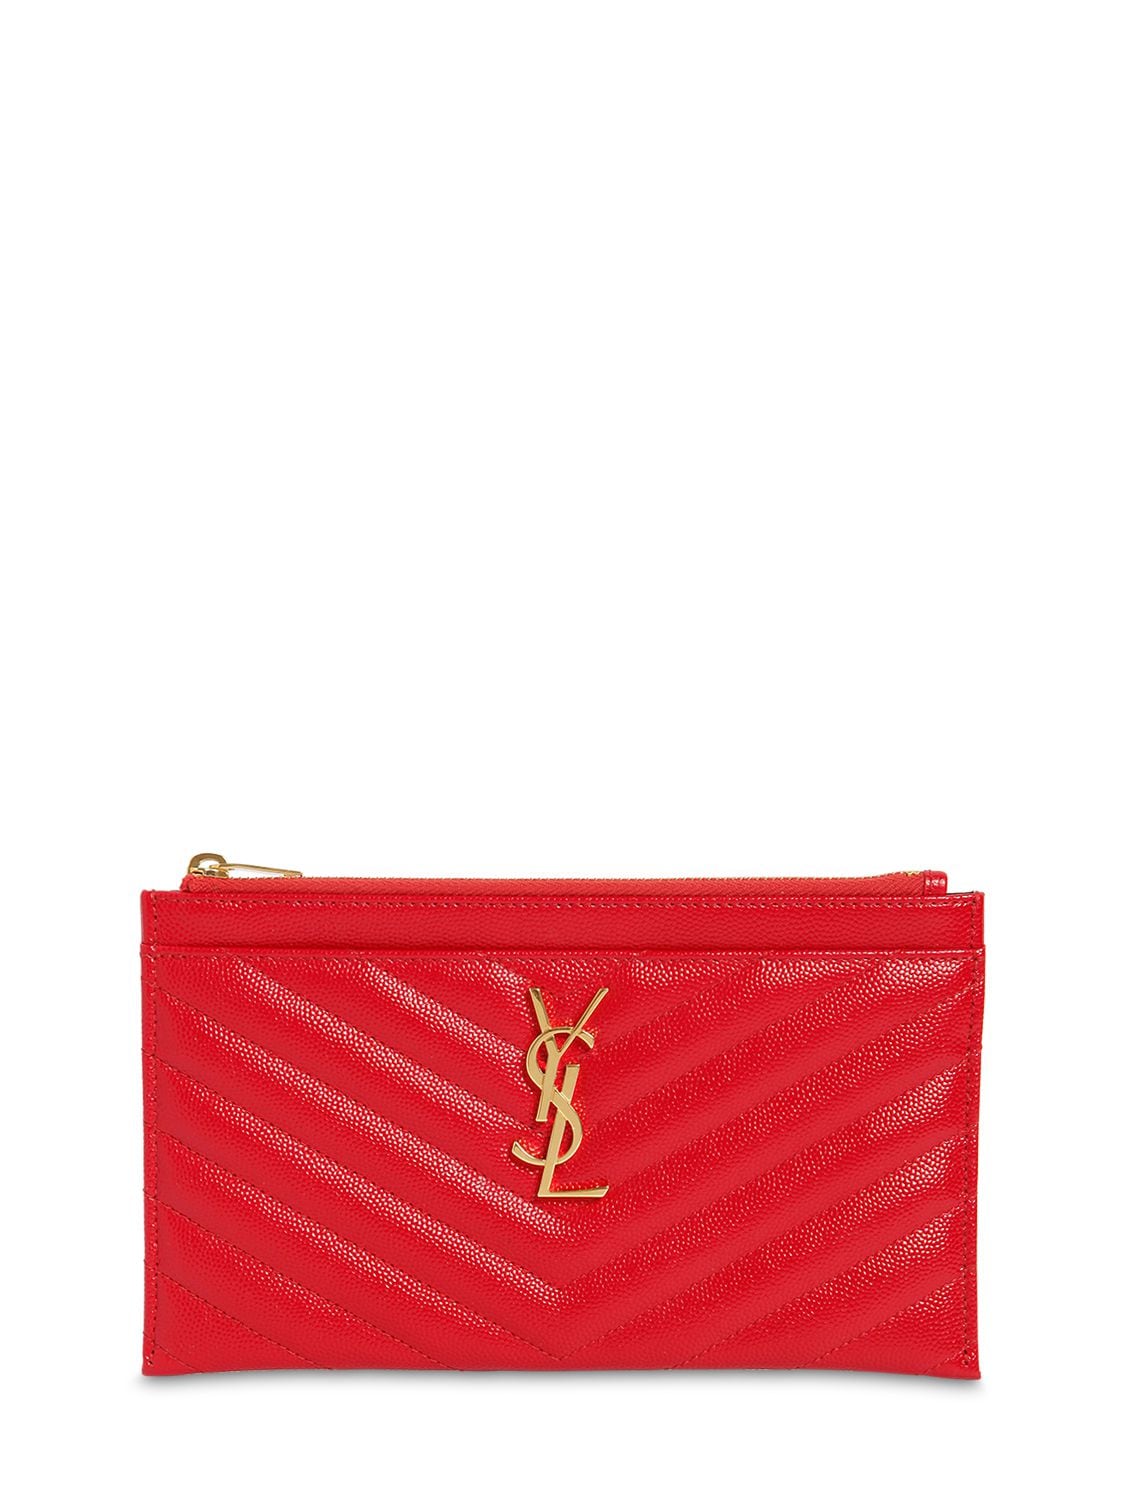 Saint Laurent Small Quilted Leather Clutch In Red